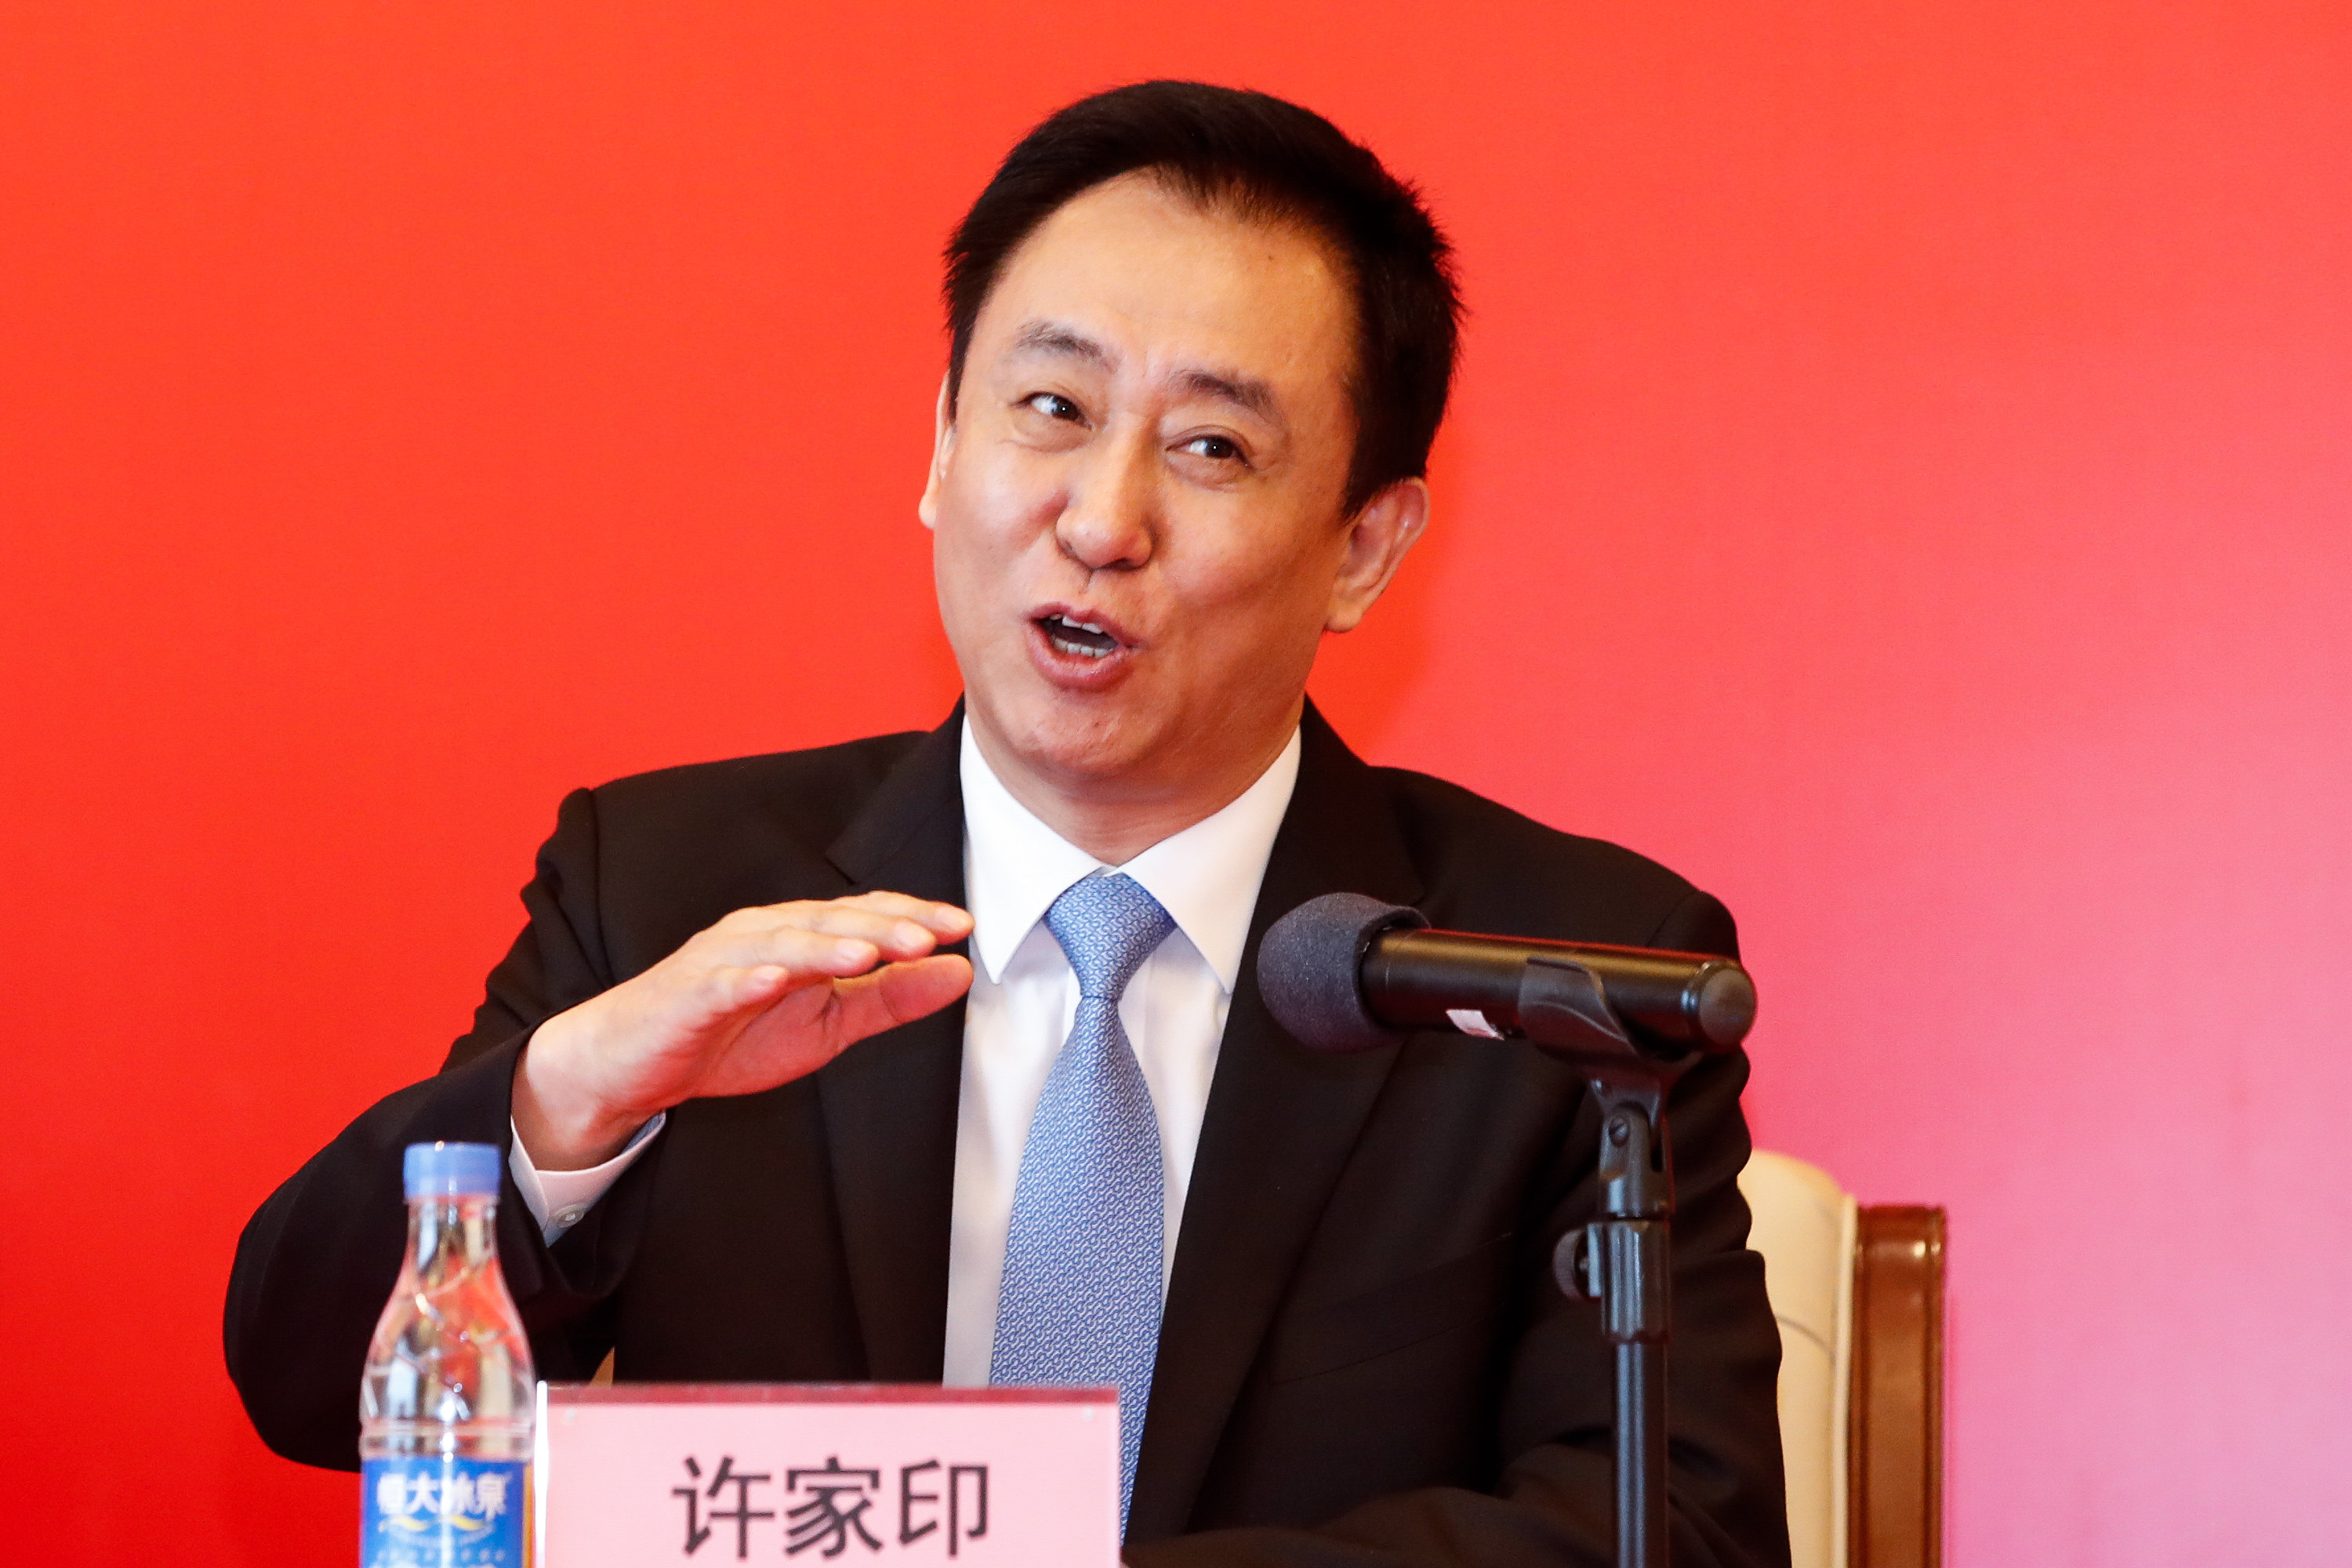 China Evergrande Group founder Hui Kayan asked his employees to work towards setting the company on the right track once again. Photo: Getty Images